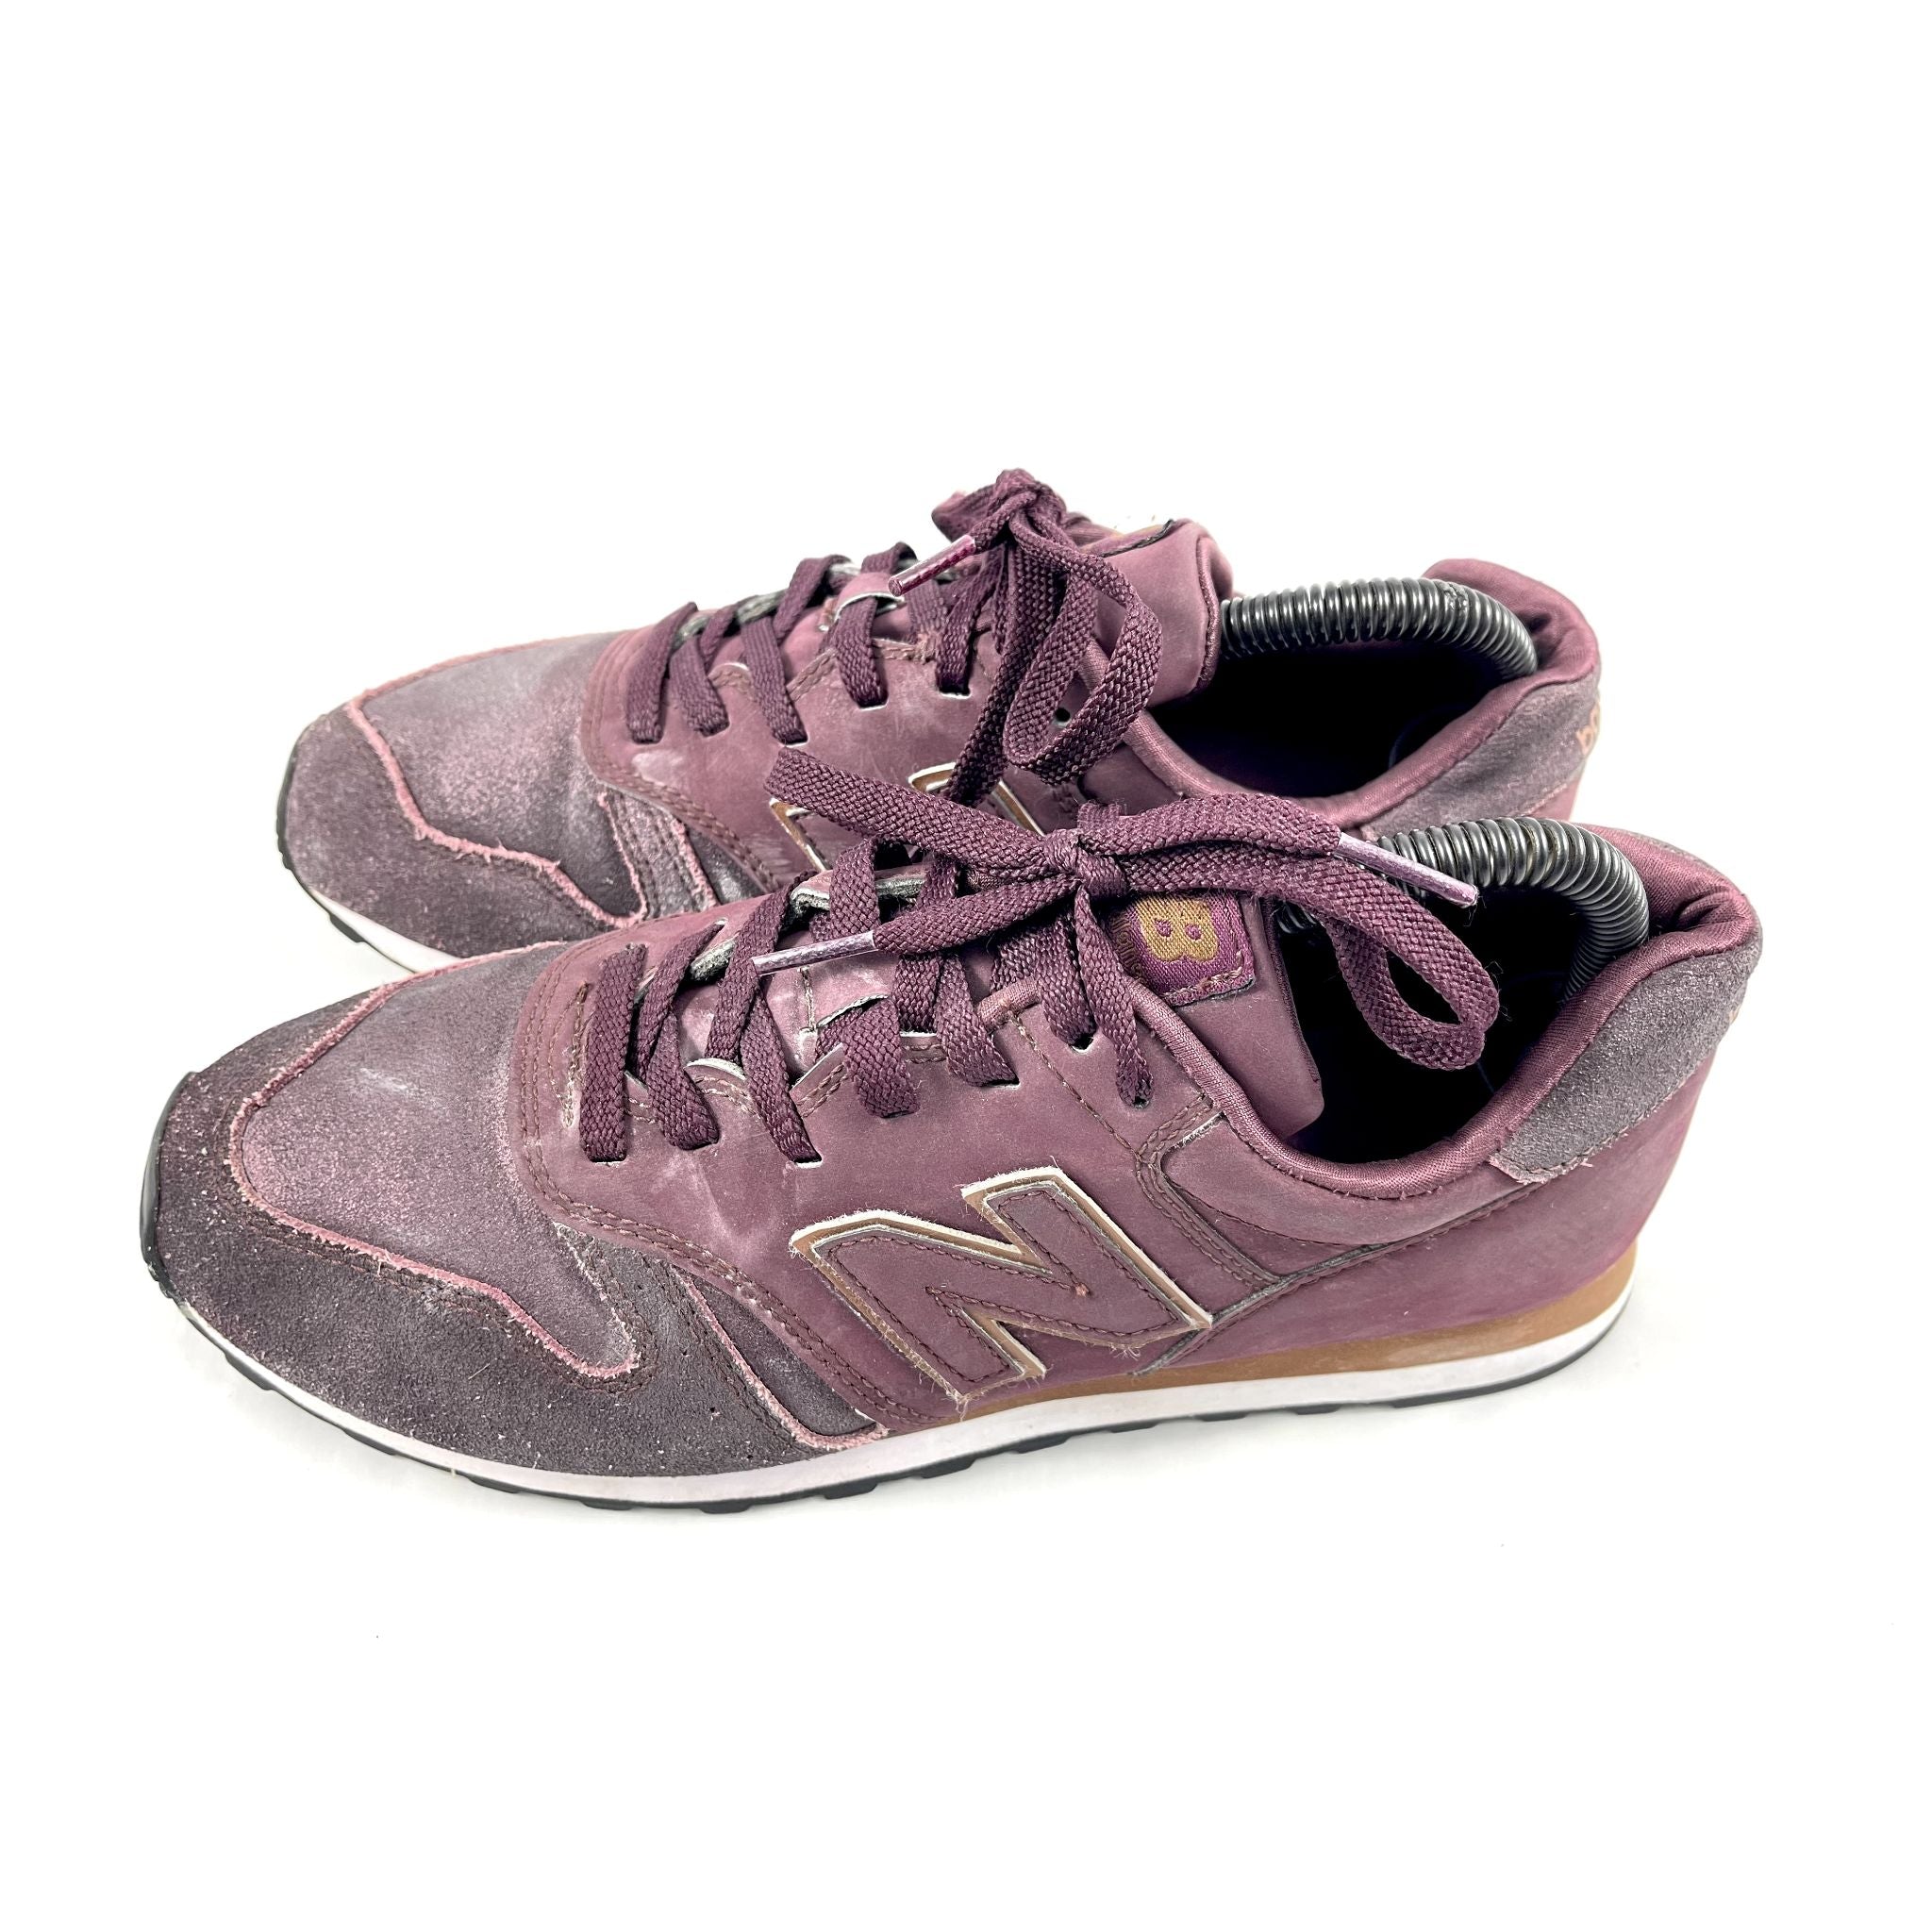 Branded New Balance Sneakers